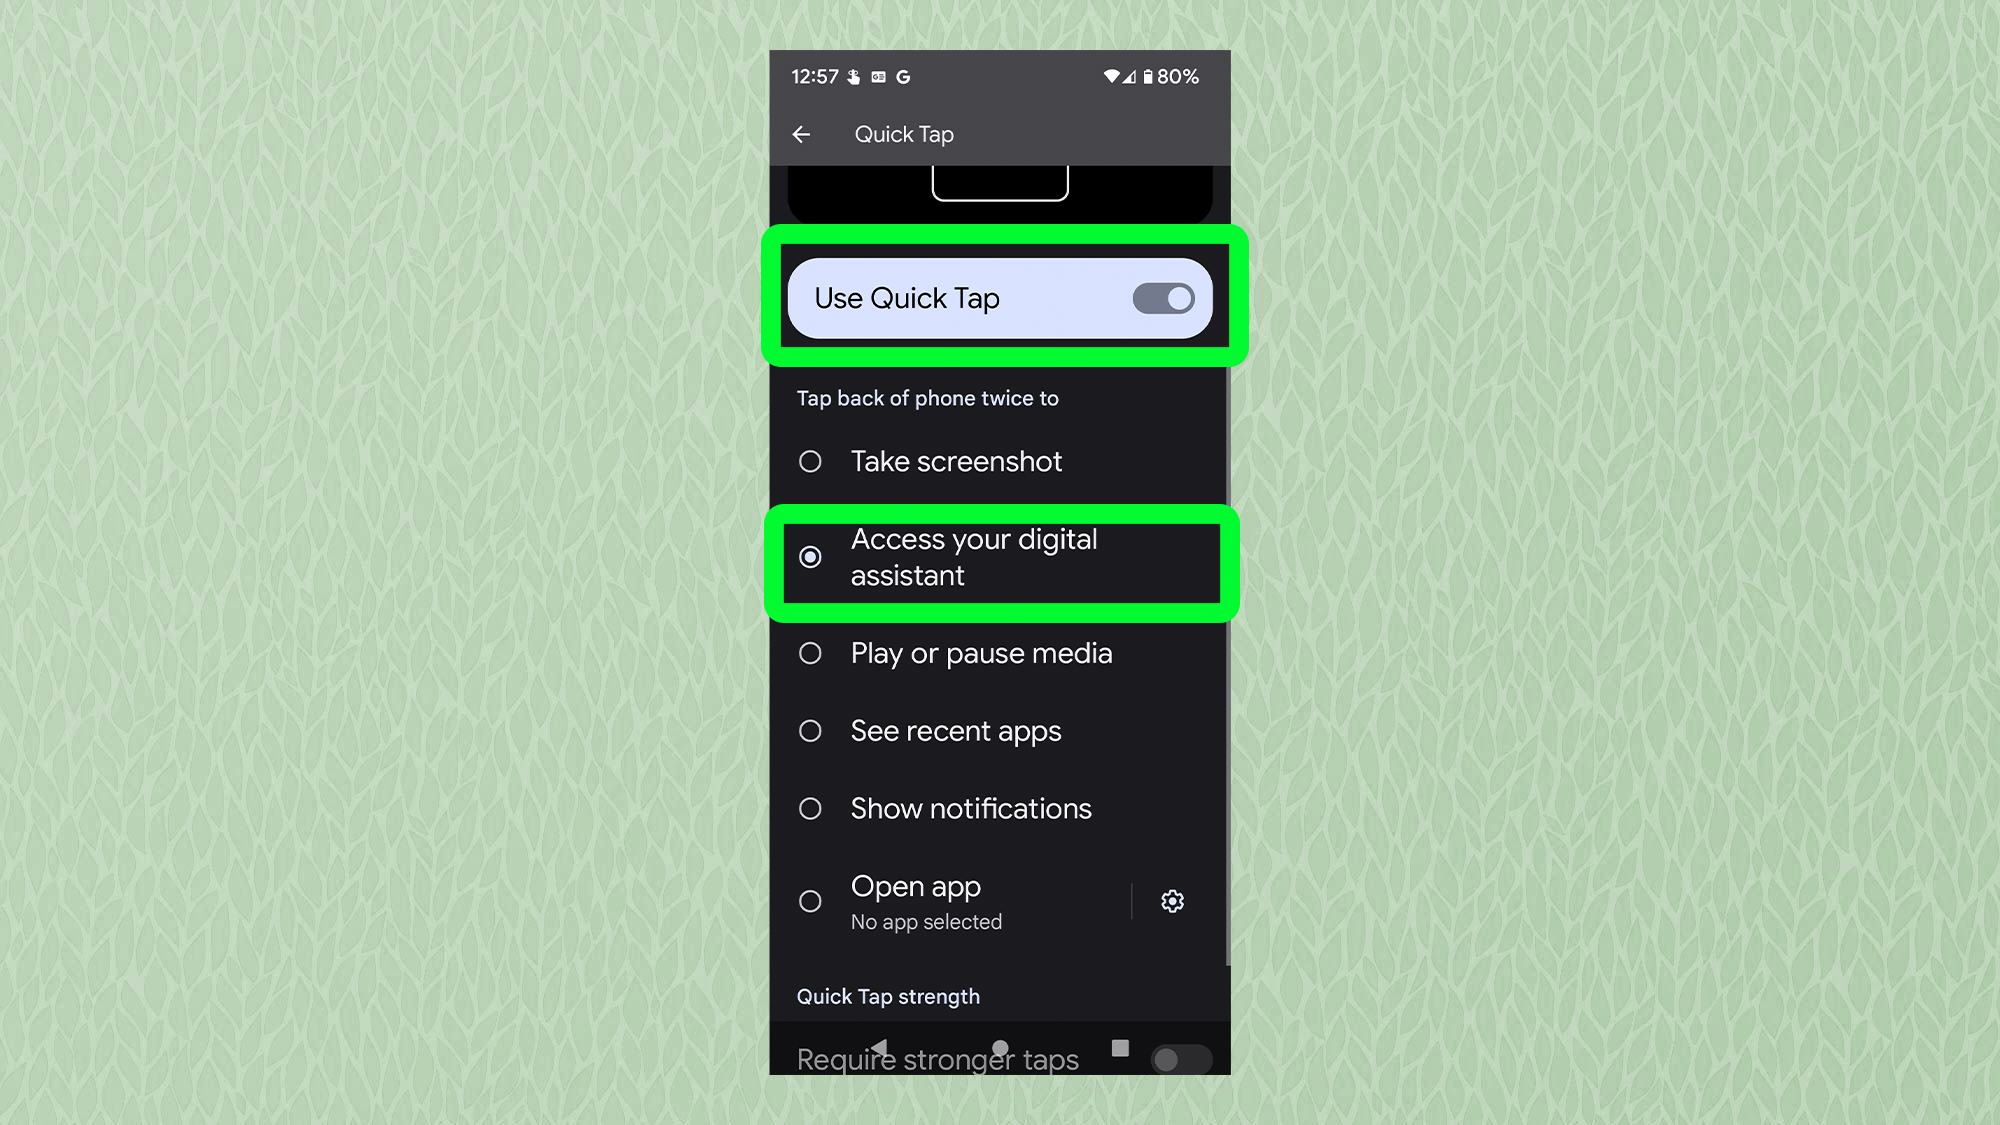 A screenshot from Android showing the Quick Tap menu with 'Use Quick tap' and 'Google Assistant' highlighted